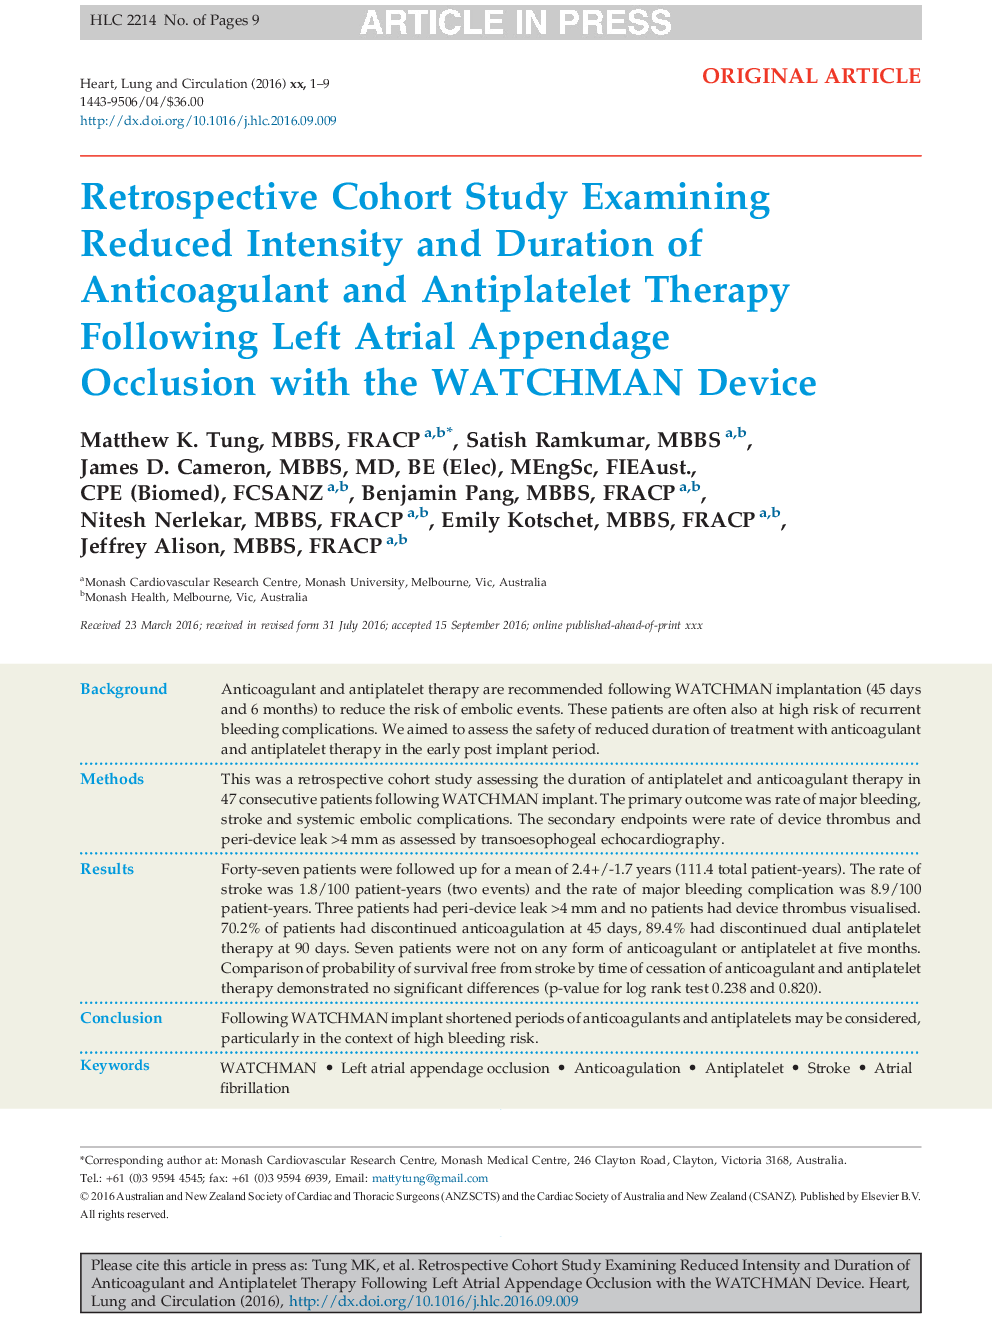 Retrospective Cohort Study Examining Reduced Intensity and Duration of Anticoagulant and Antiplatelet Therapy Following Left Atrial Appendage Occlusion with the WATCHMAN Device